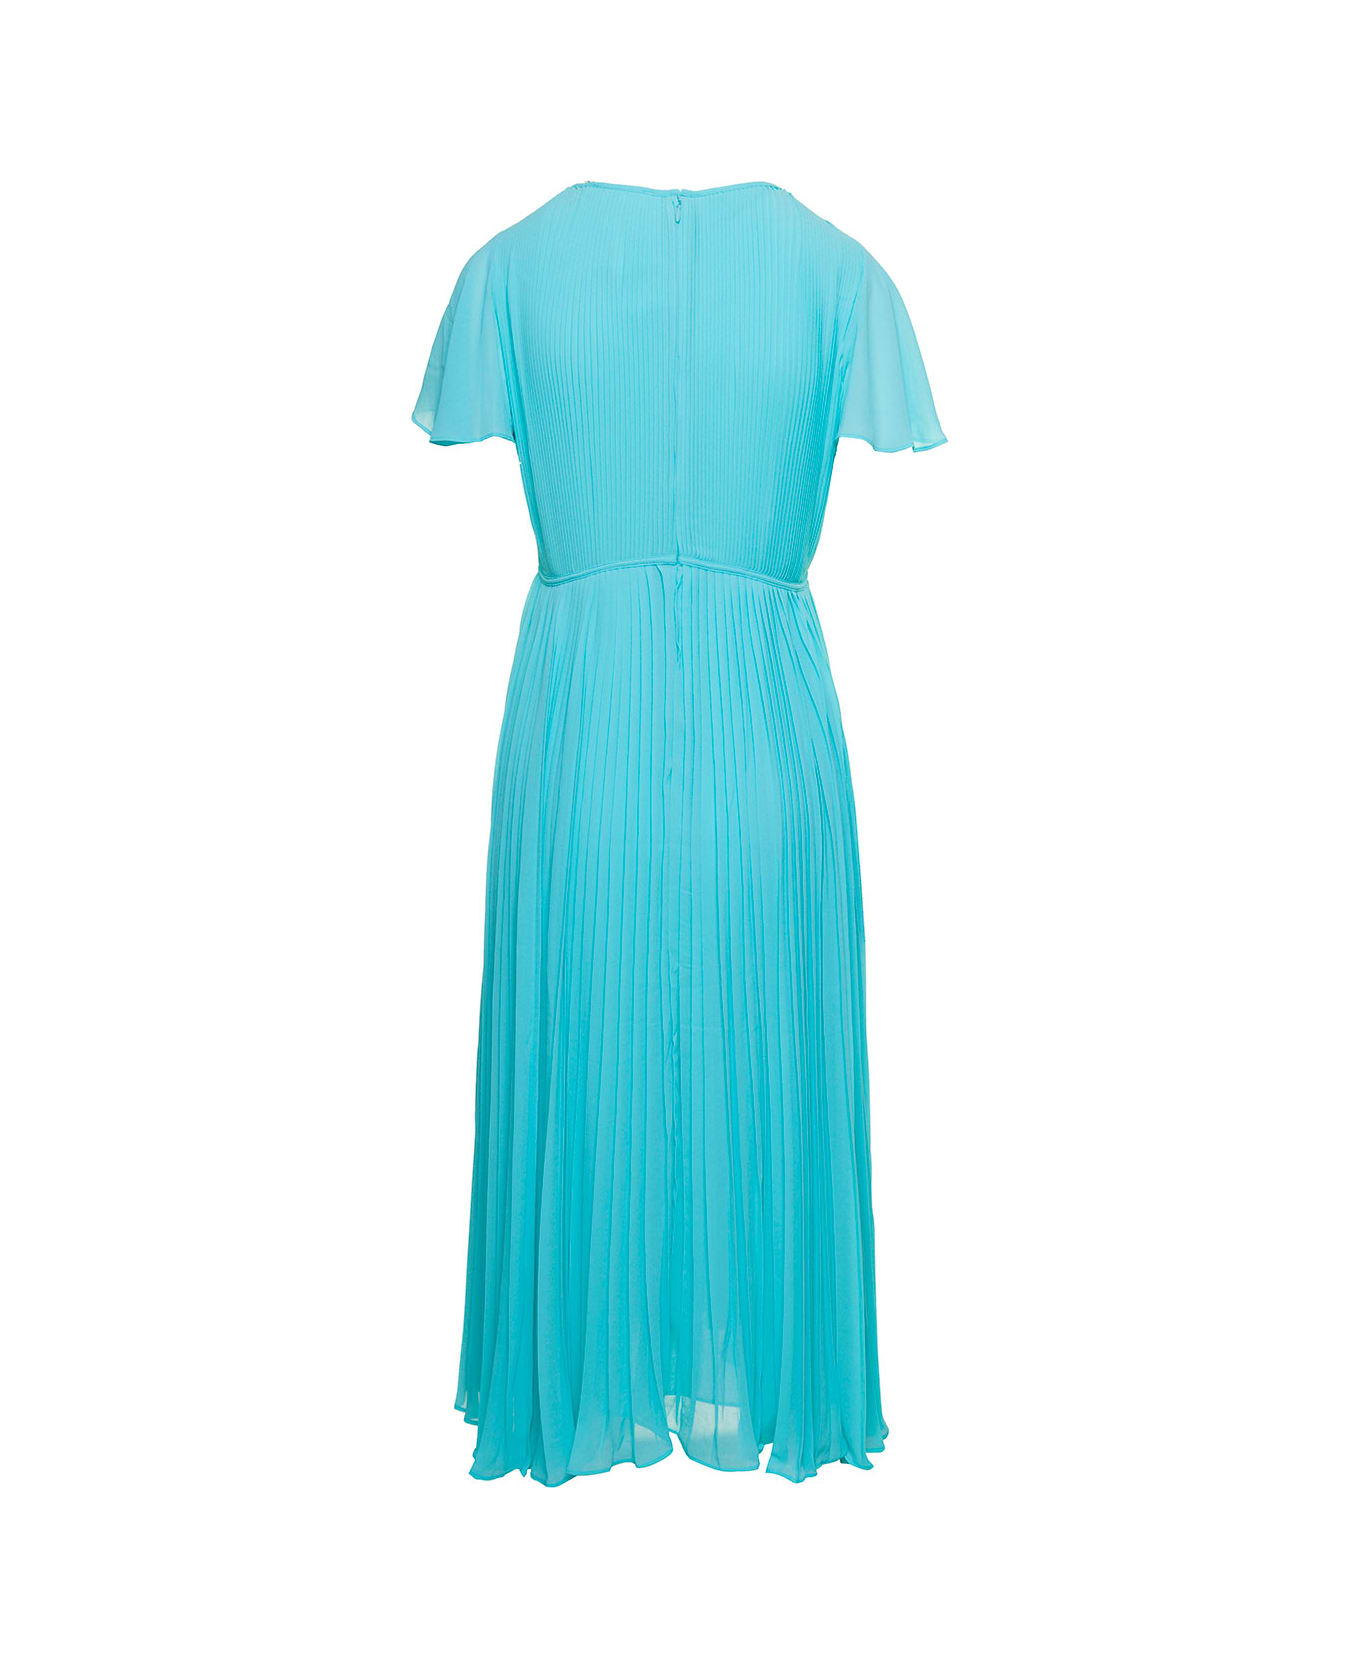 Michael Kors Empire-style Midi Dress In Pleated Fabric - Turquoise